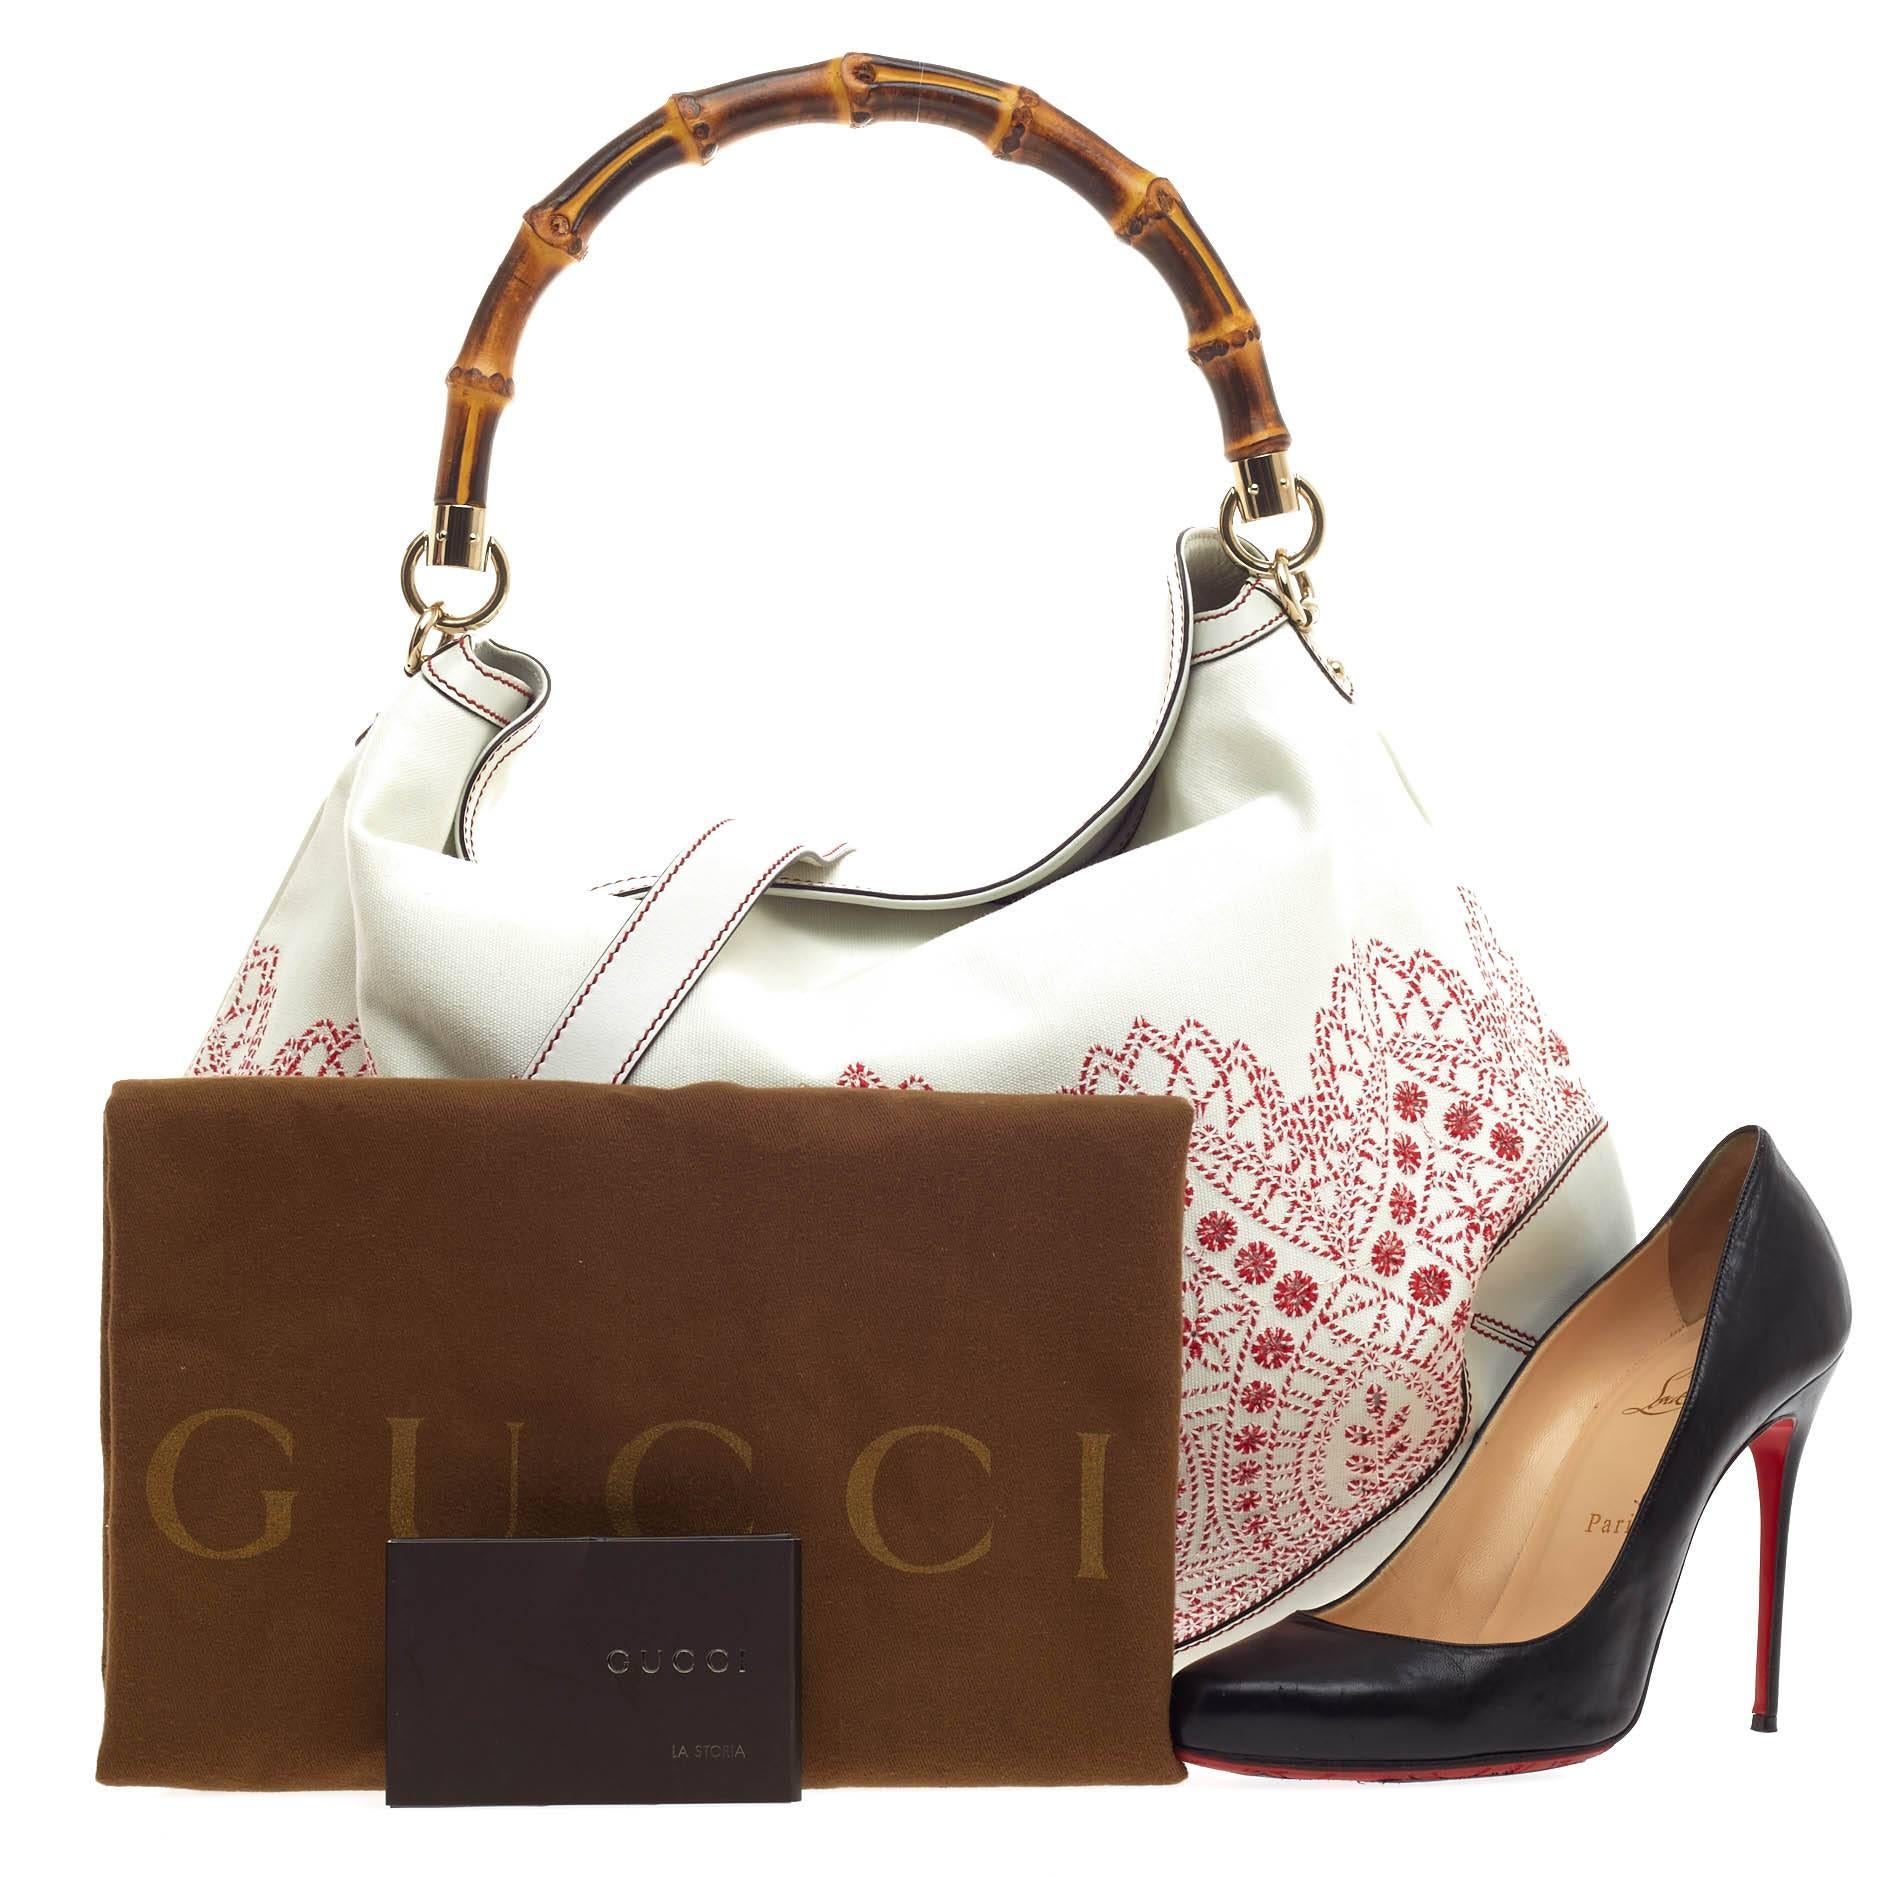 This authentic Gucci Peggy Bamboo Handle Hobo Embroidered Canvas is perfect for daily excursions. Crafted in white leather, this detailed hobo features an embroidered patterned canvas with red and white thread, signature bamboo top handle and